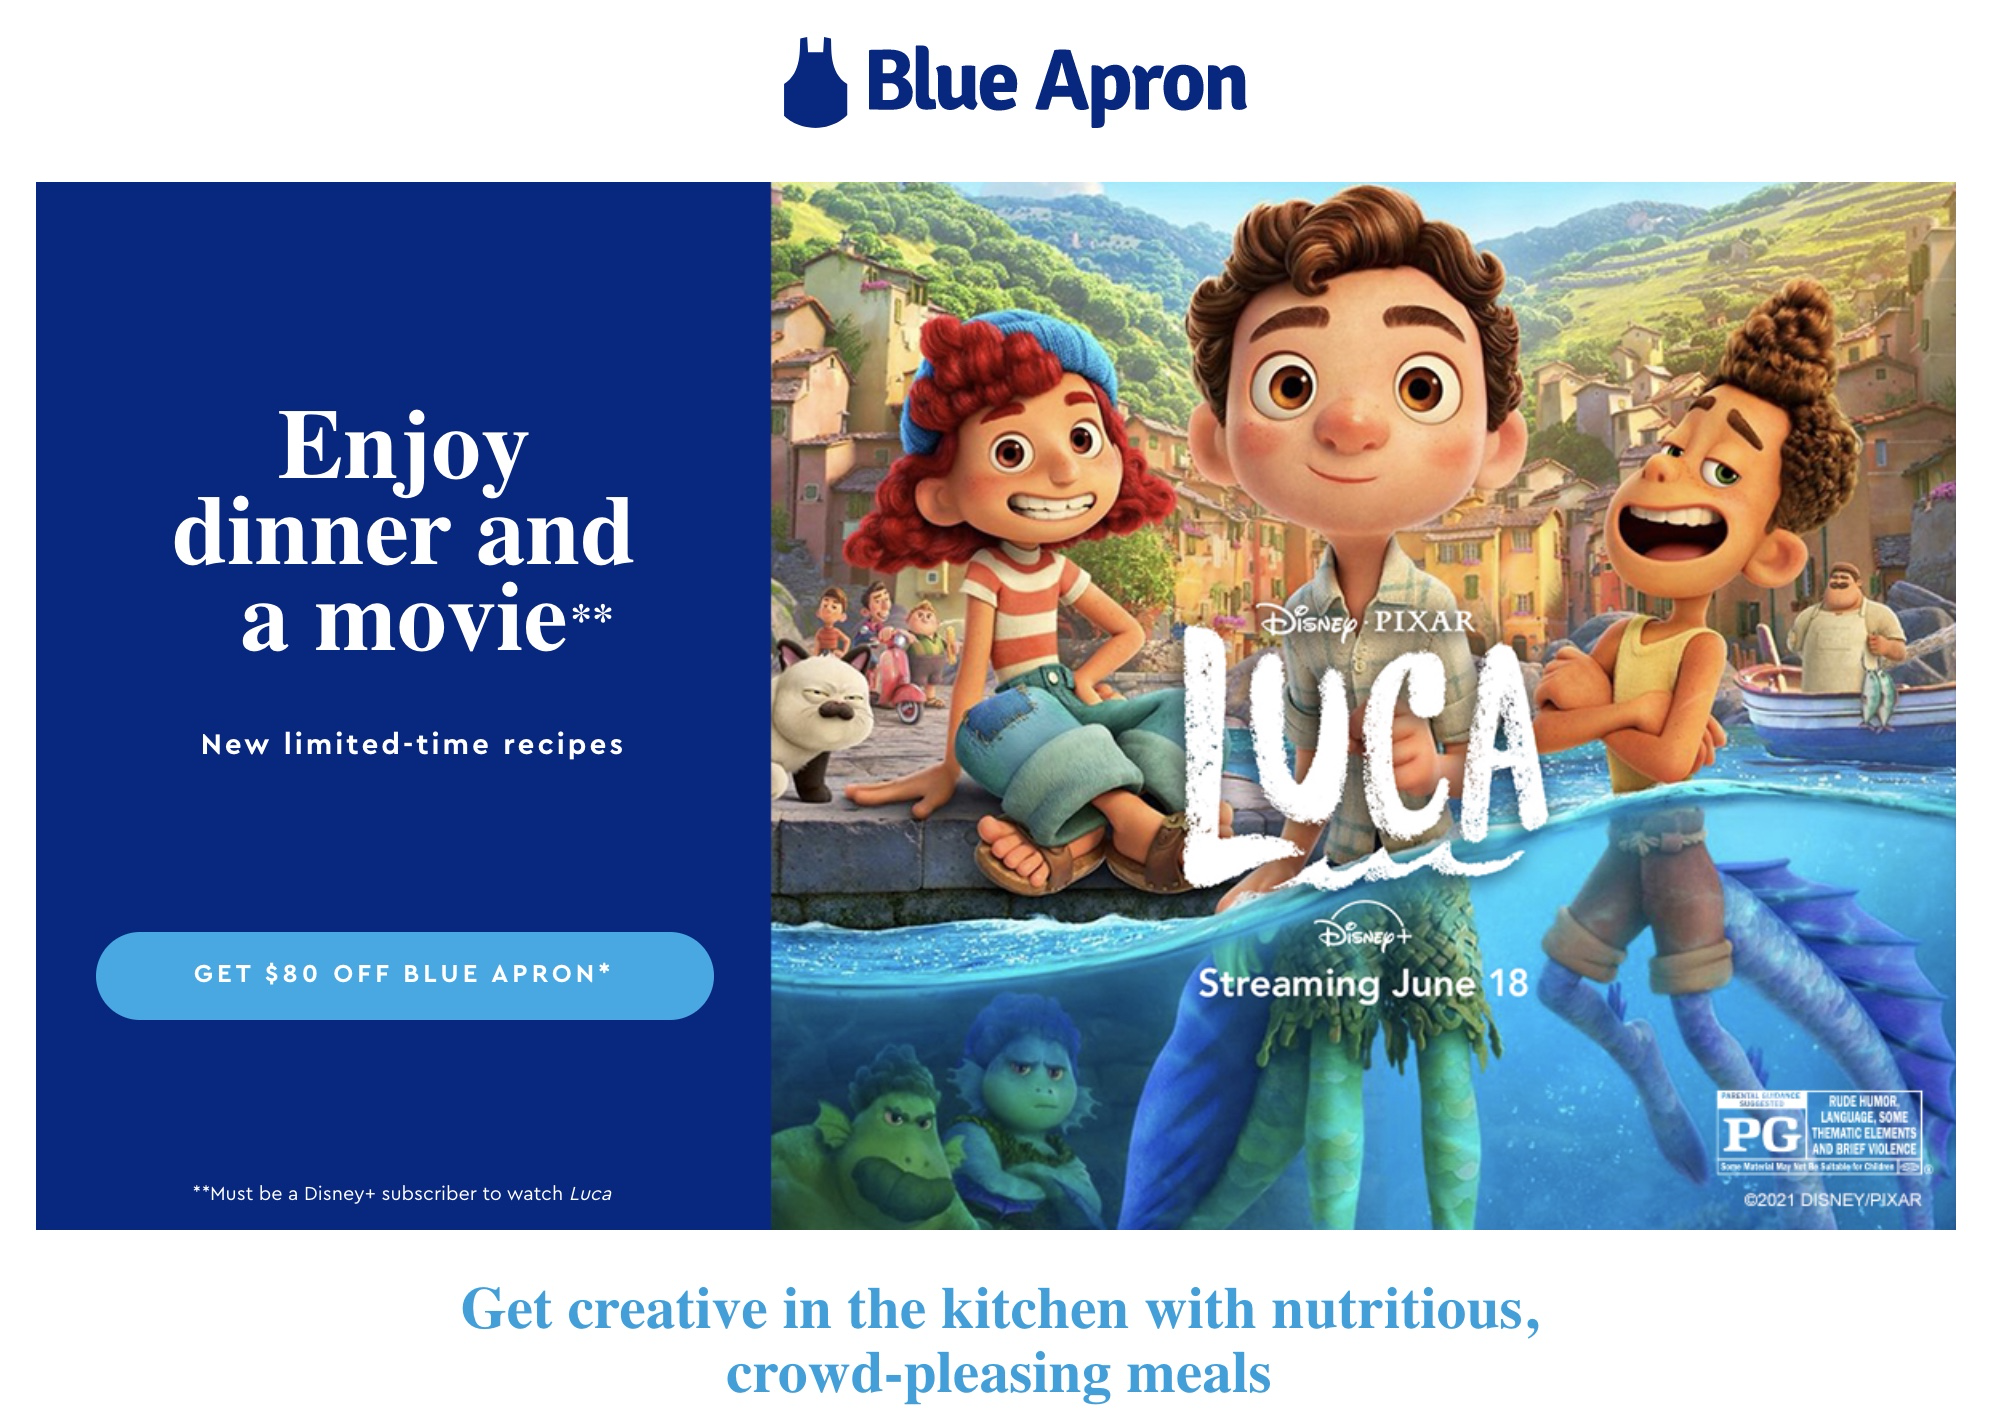 How to watch Luca on Disney Plus